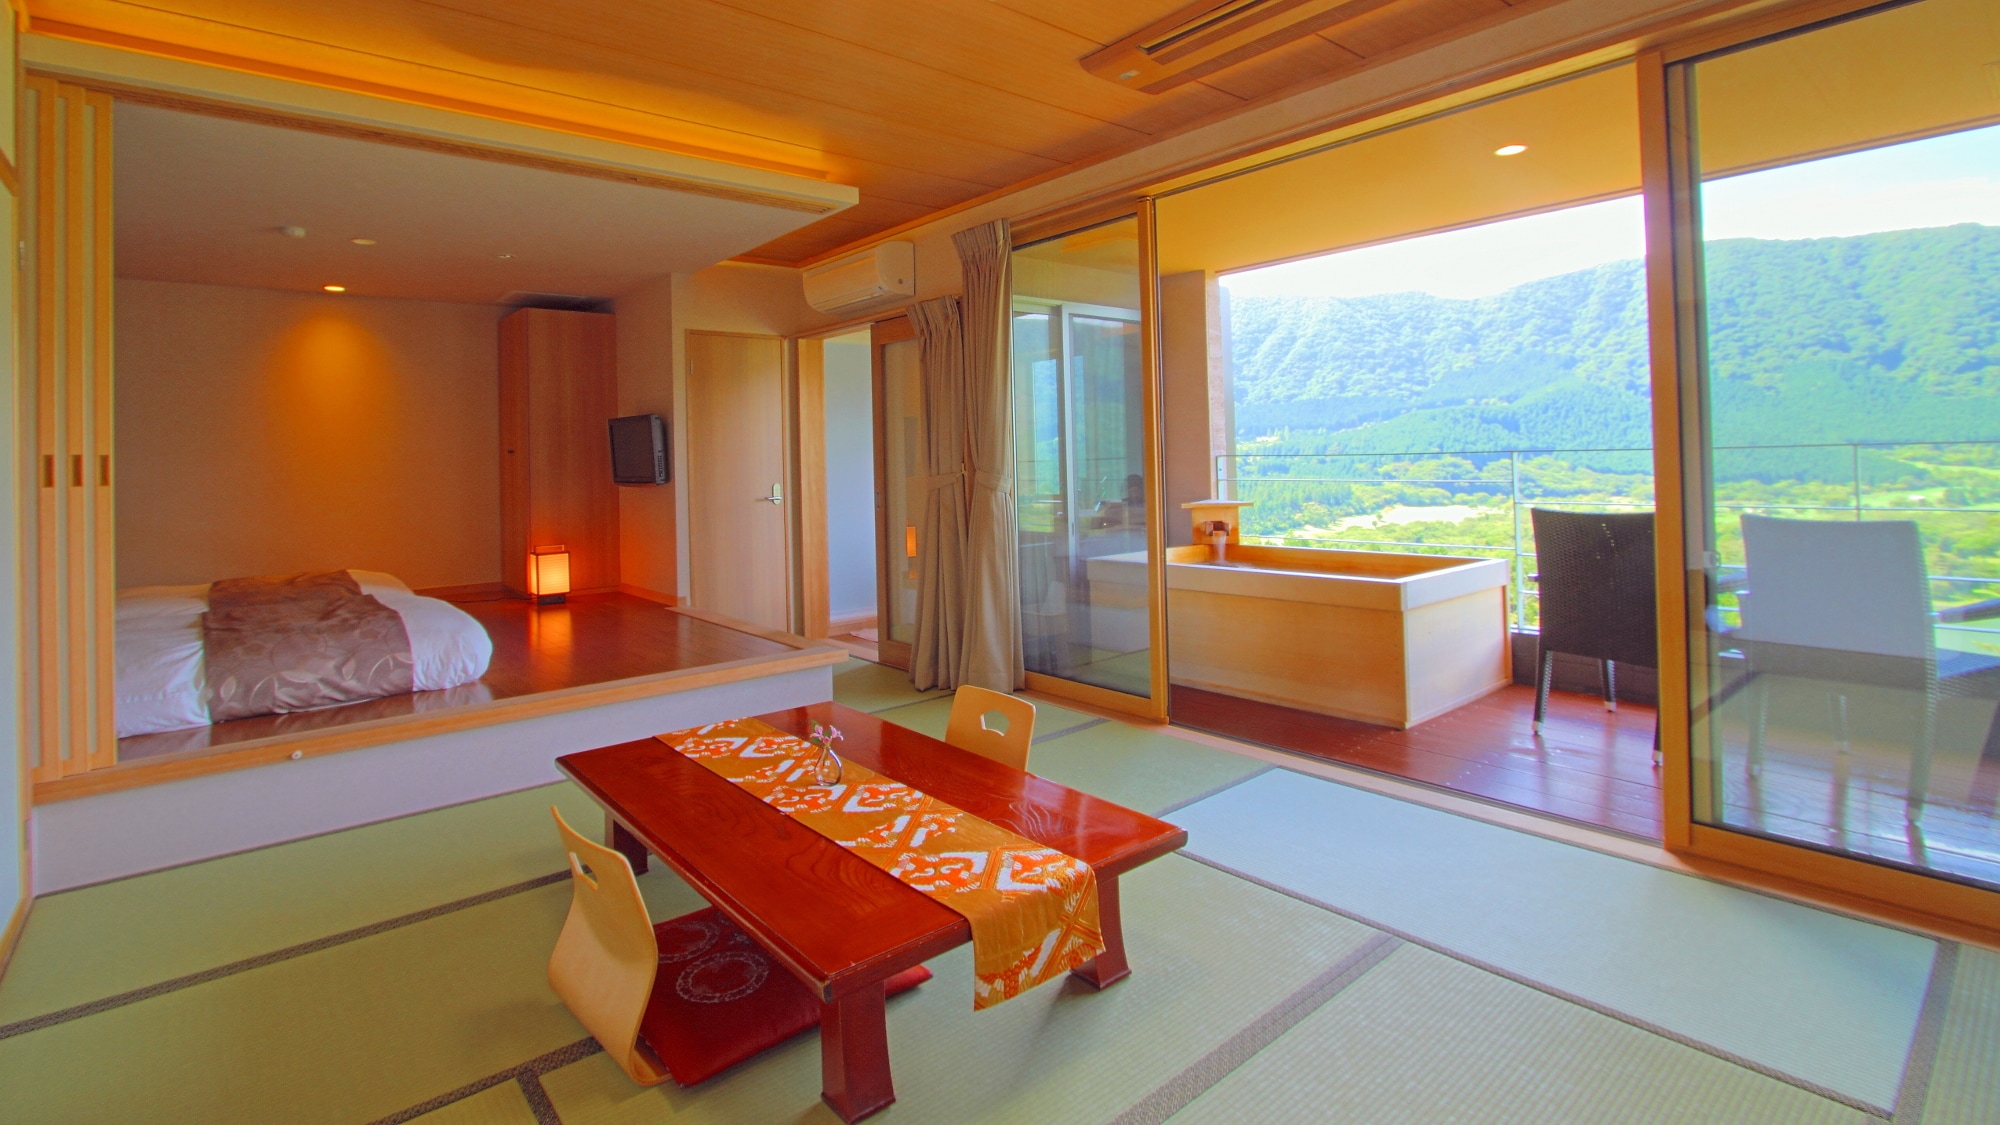 An example of a suite with an open-air hot spring bath (Orihime / Subaru)